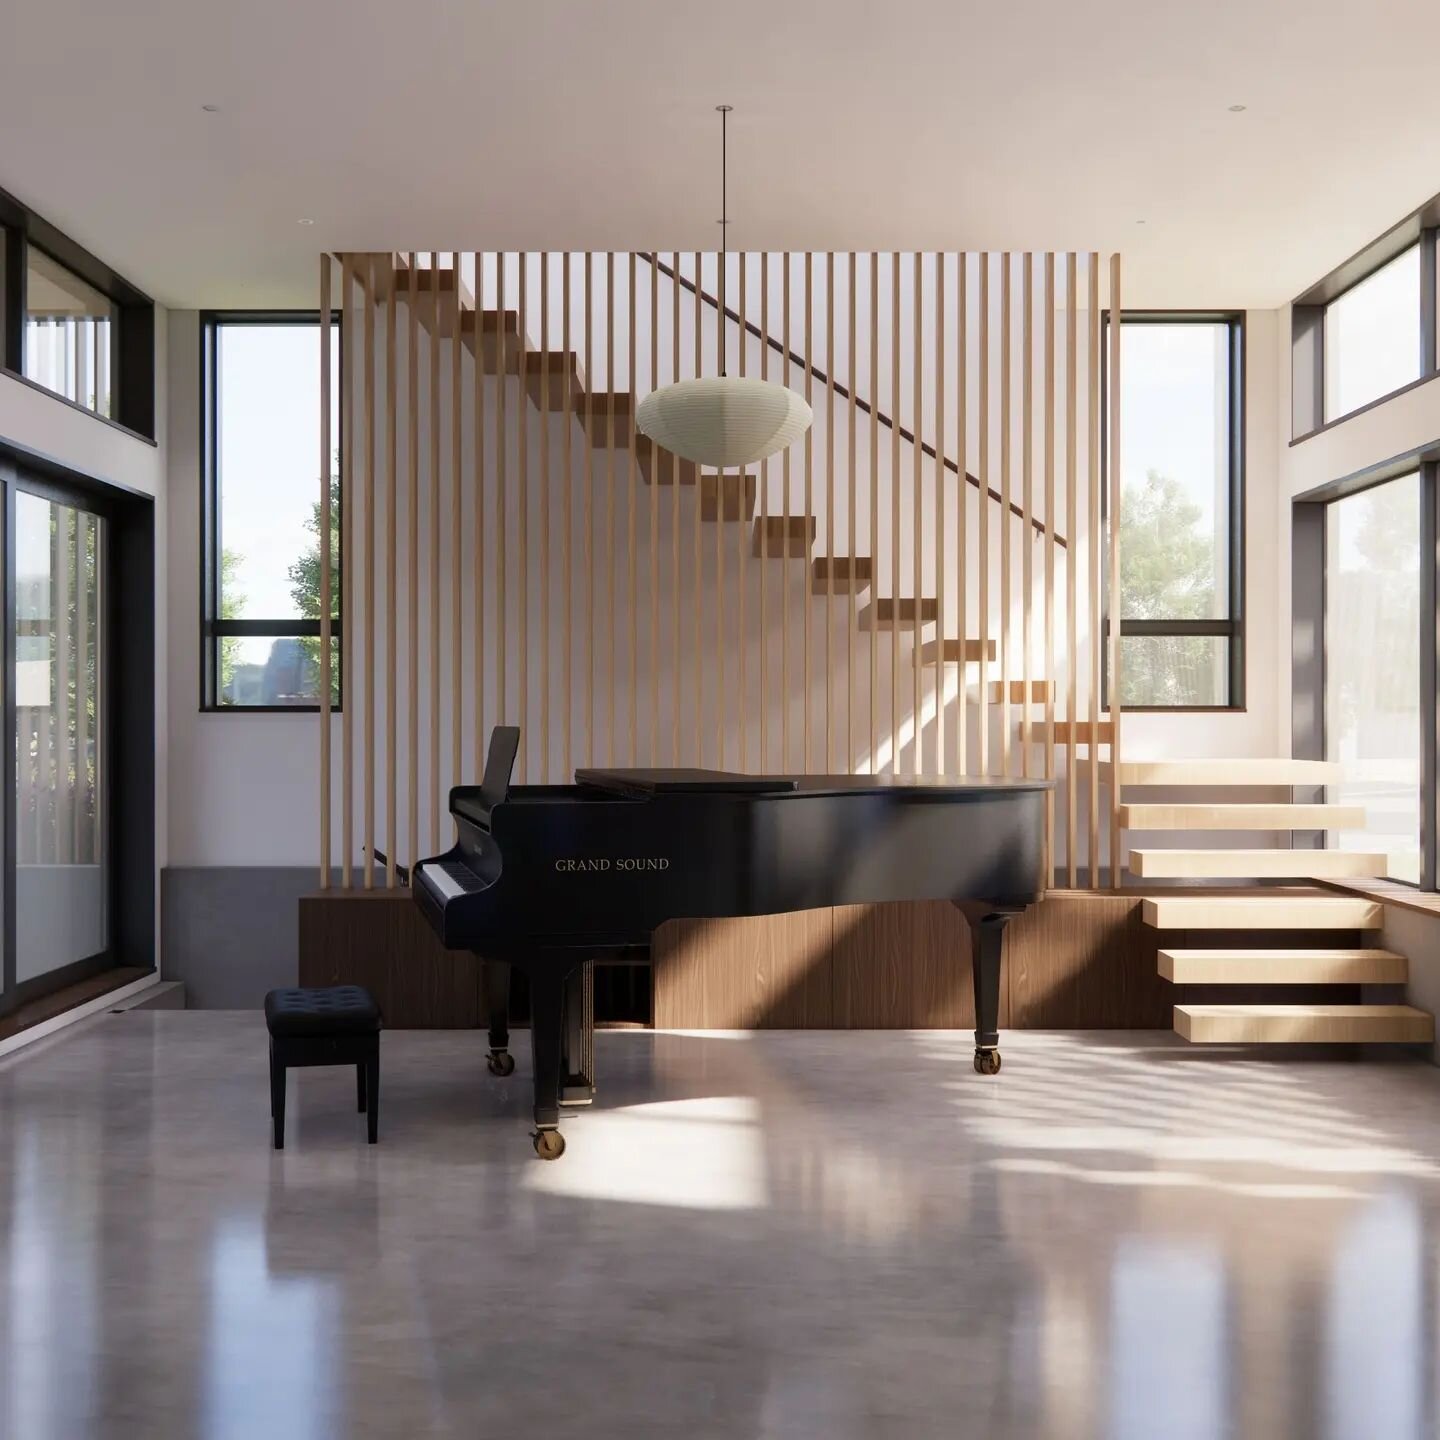 Easy listening on the horizon at the Firehouse Residence Addition⁠
+⁠
+⁠
#piano #musicroom #rendering #wood #stairs #architecture #denvermodern #denver #remodel #addition #sequencing #exposedconcrete #polished concrete